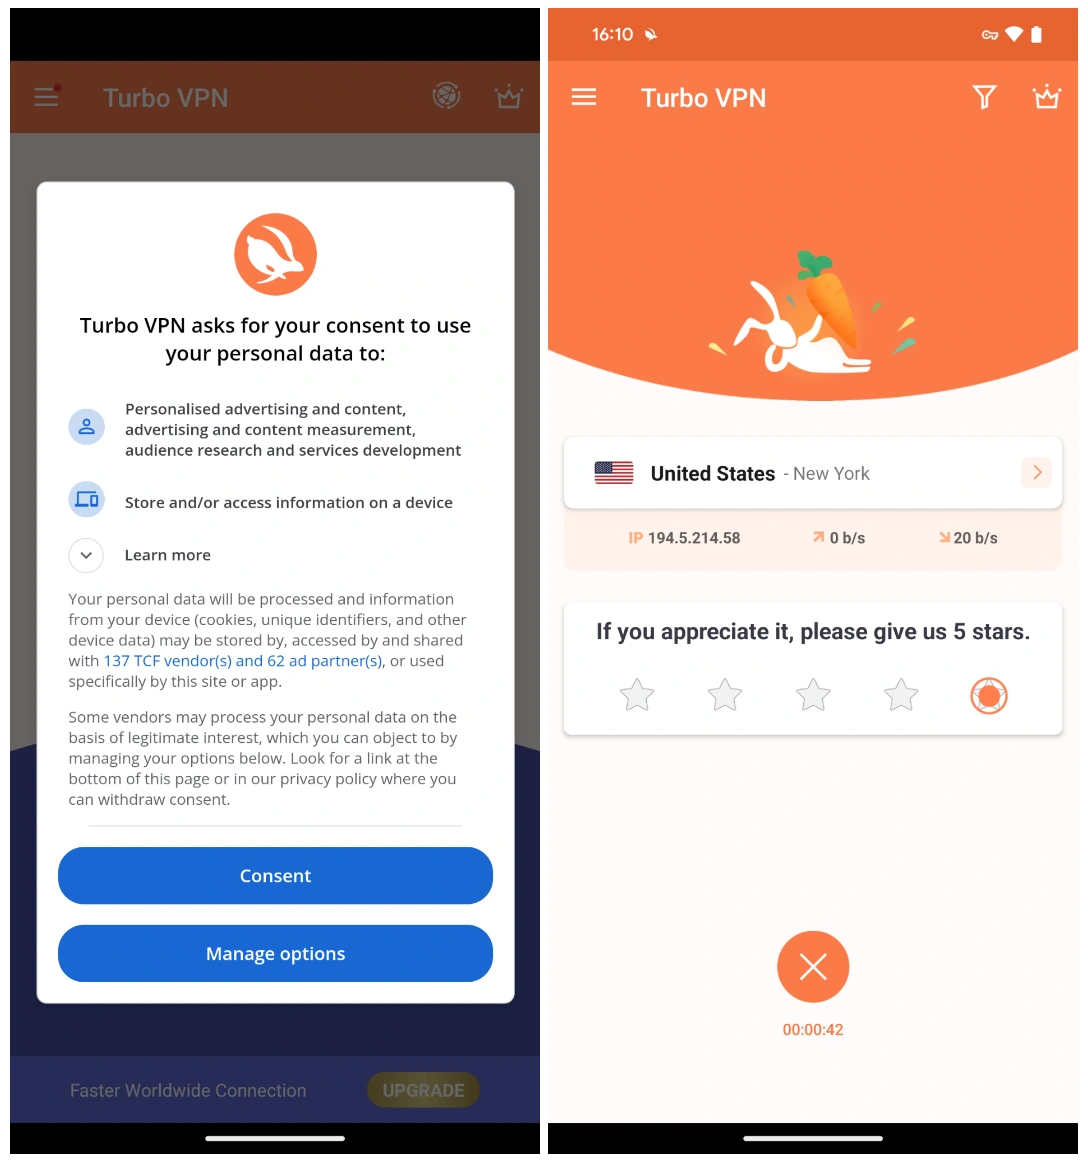 Turbo VPN's advertising policy and homepage on Android. 